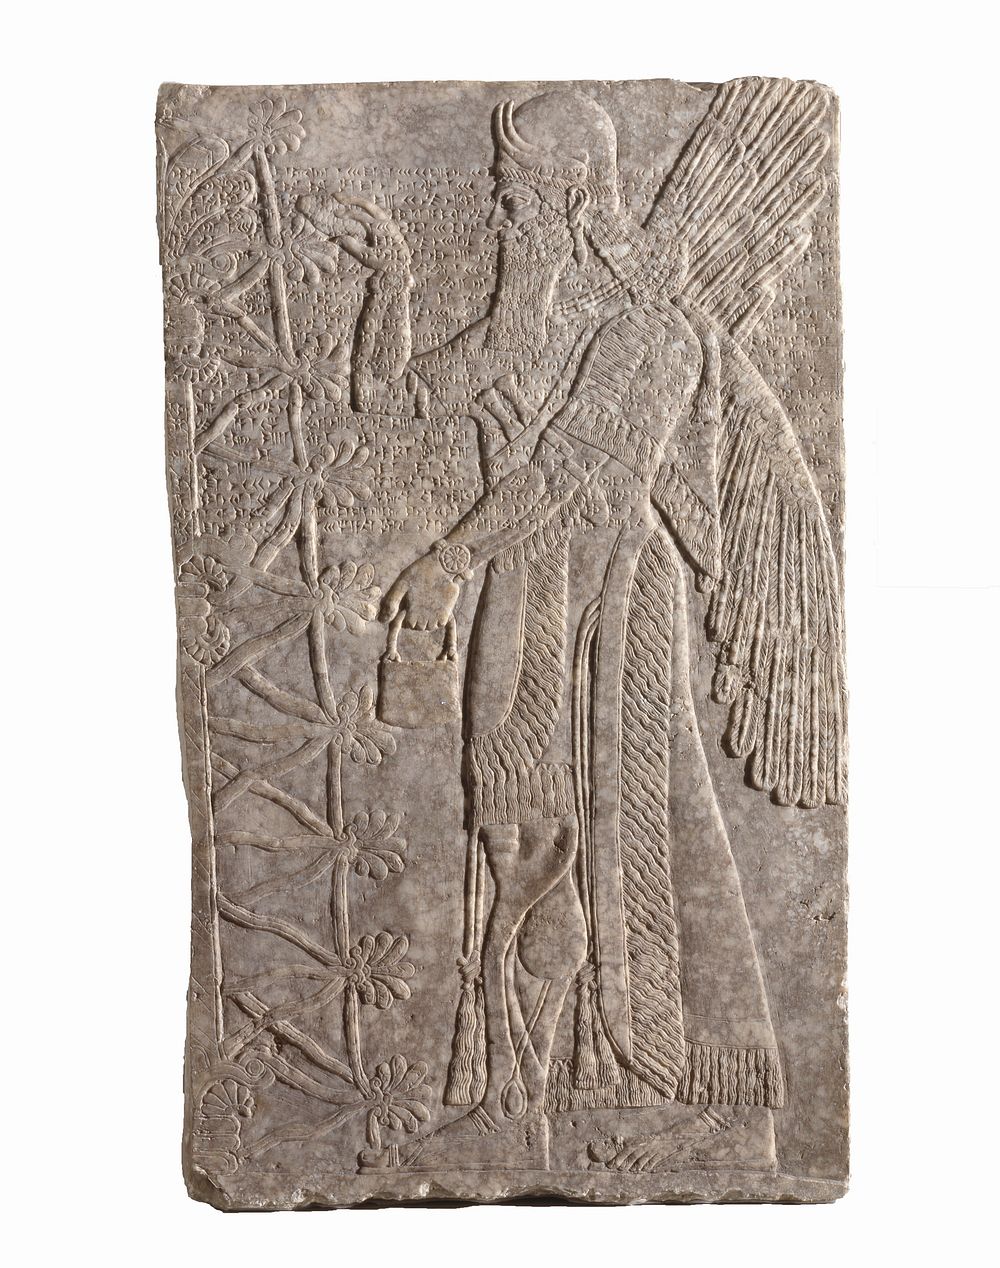 Relief with Winged Genie (883&ndash;859 BC) ornamental design in high resolution. Original from the Saint Louis Art Museum.